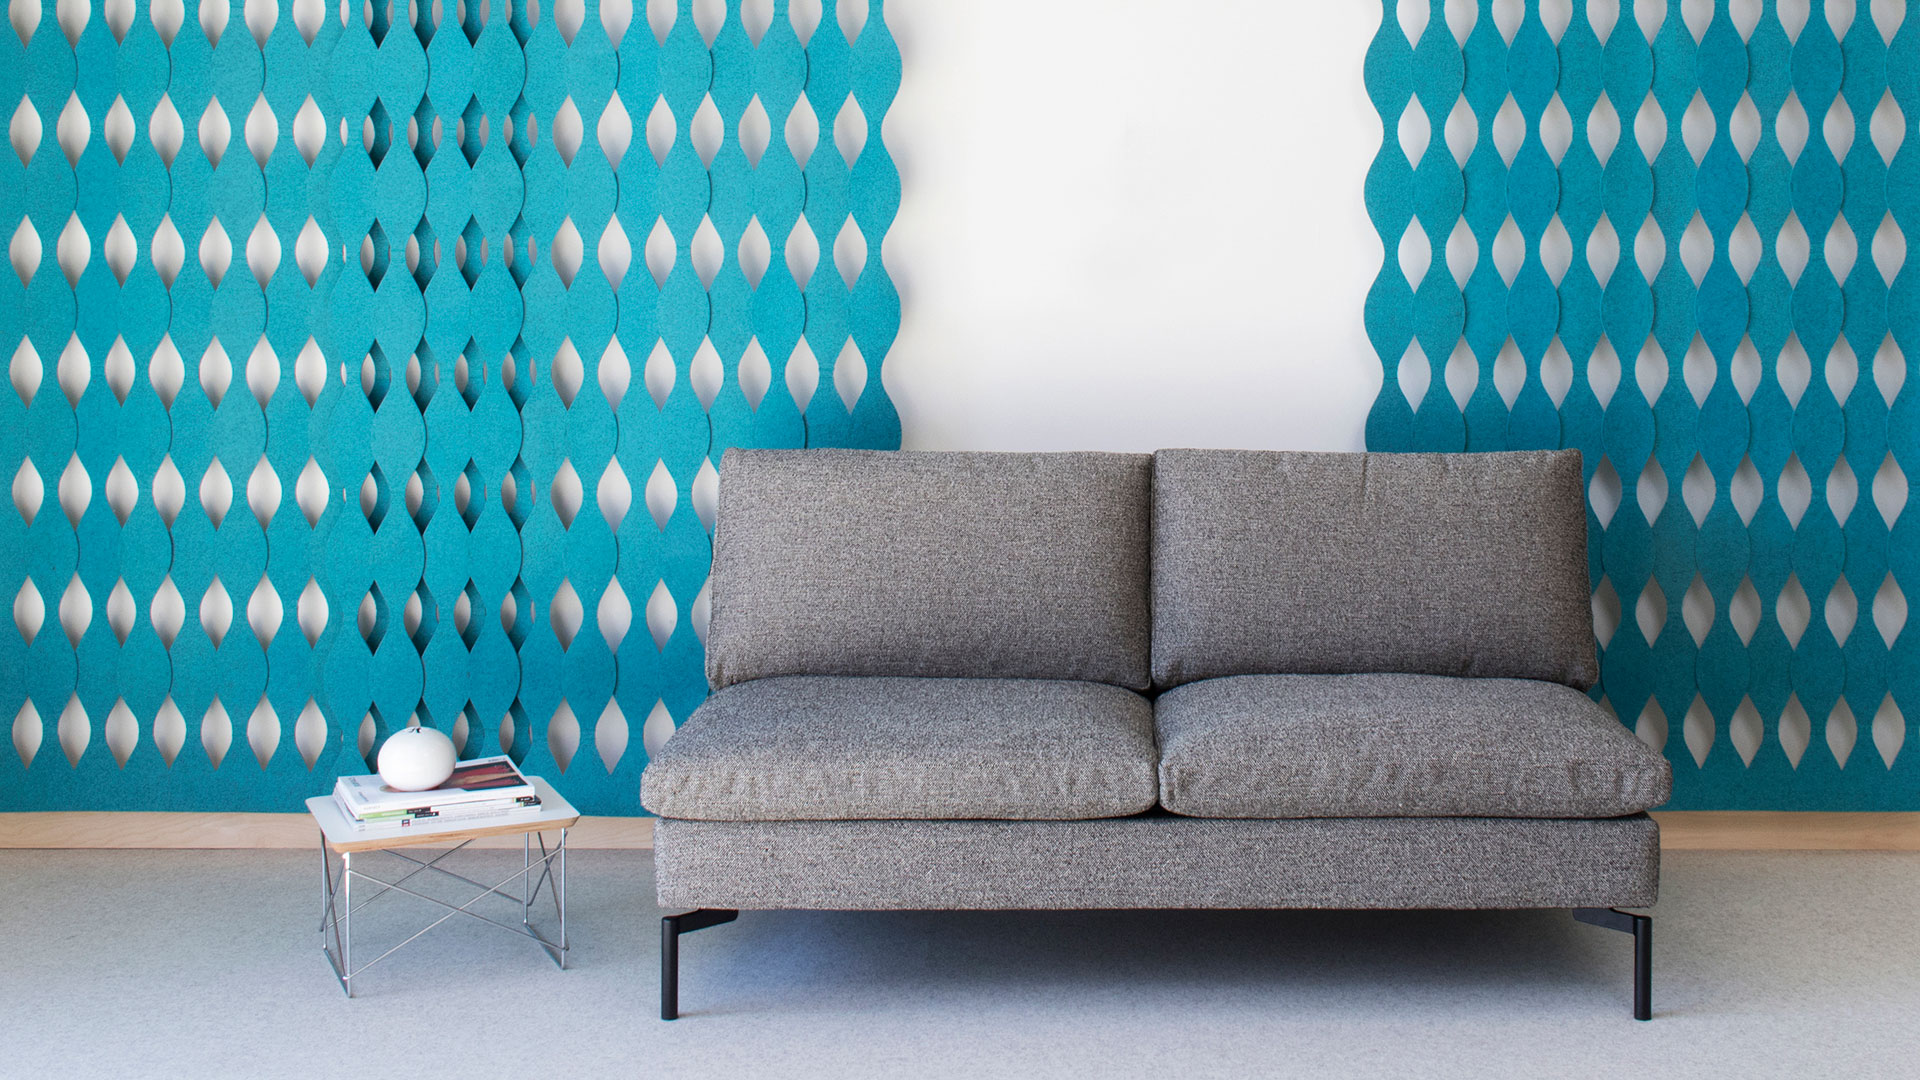 Gray couch and small table with blue felt wall screens in a curvy pattern